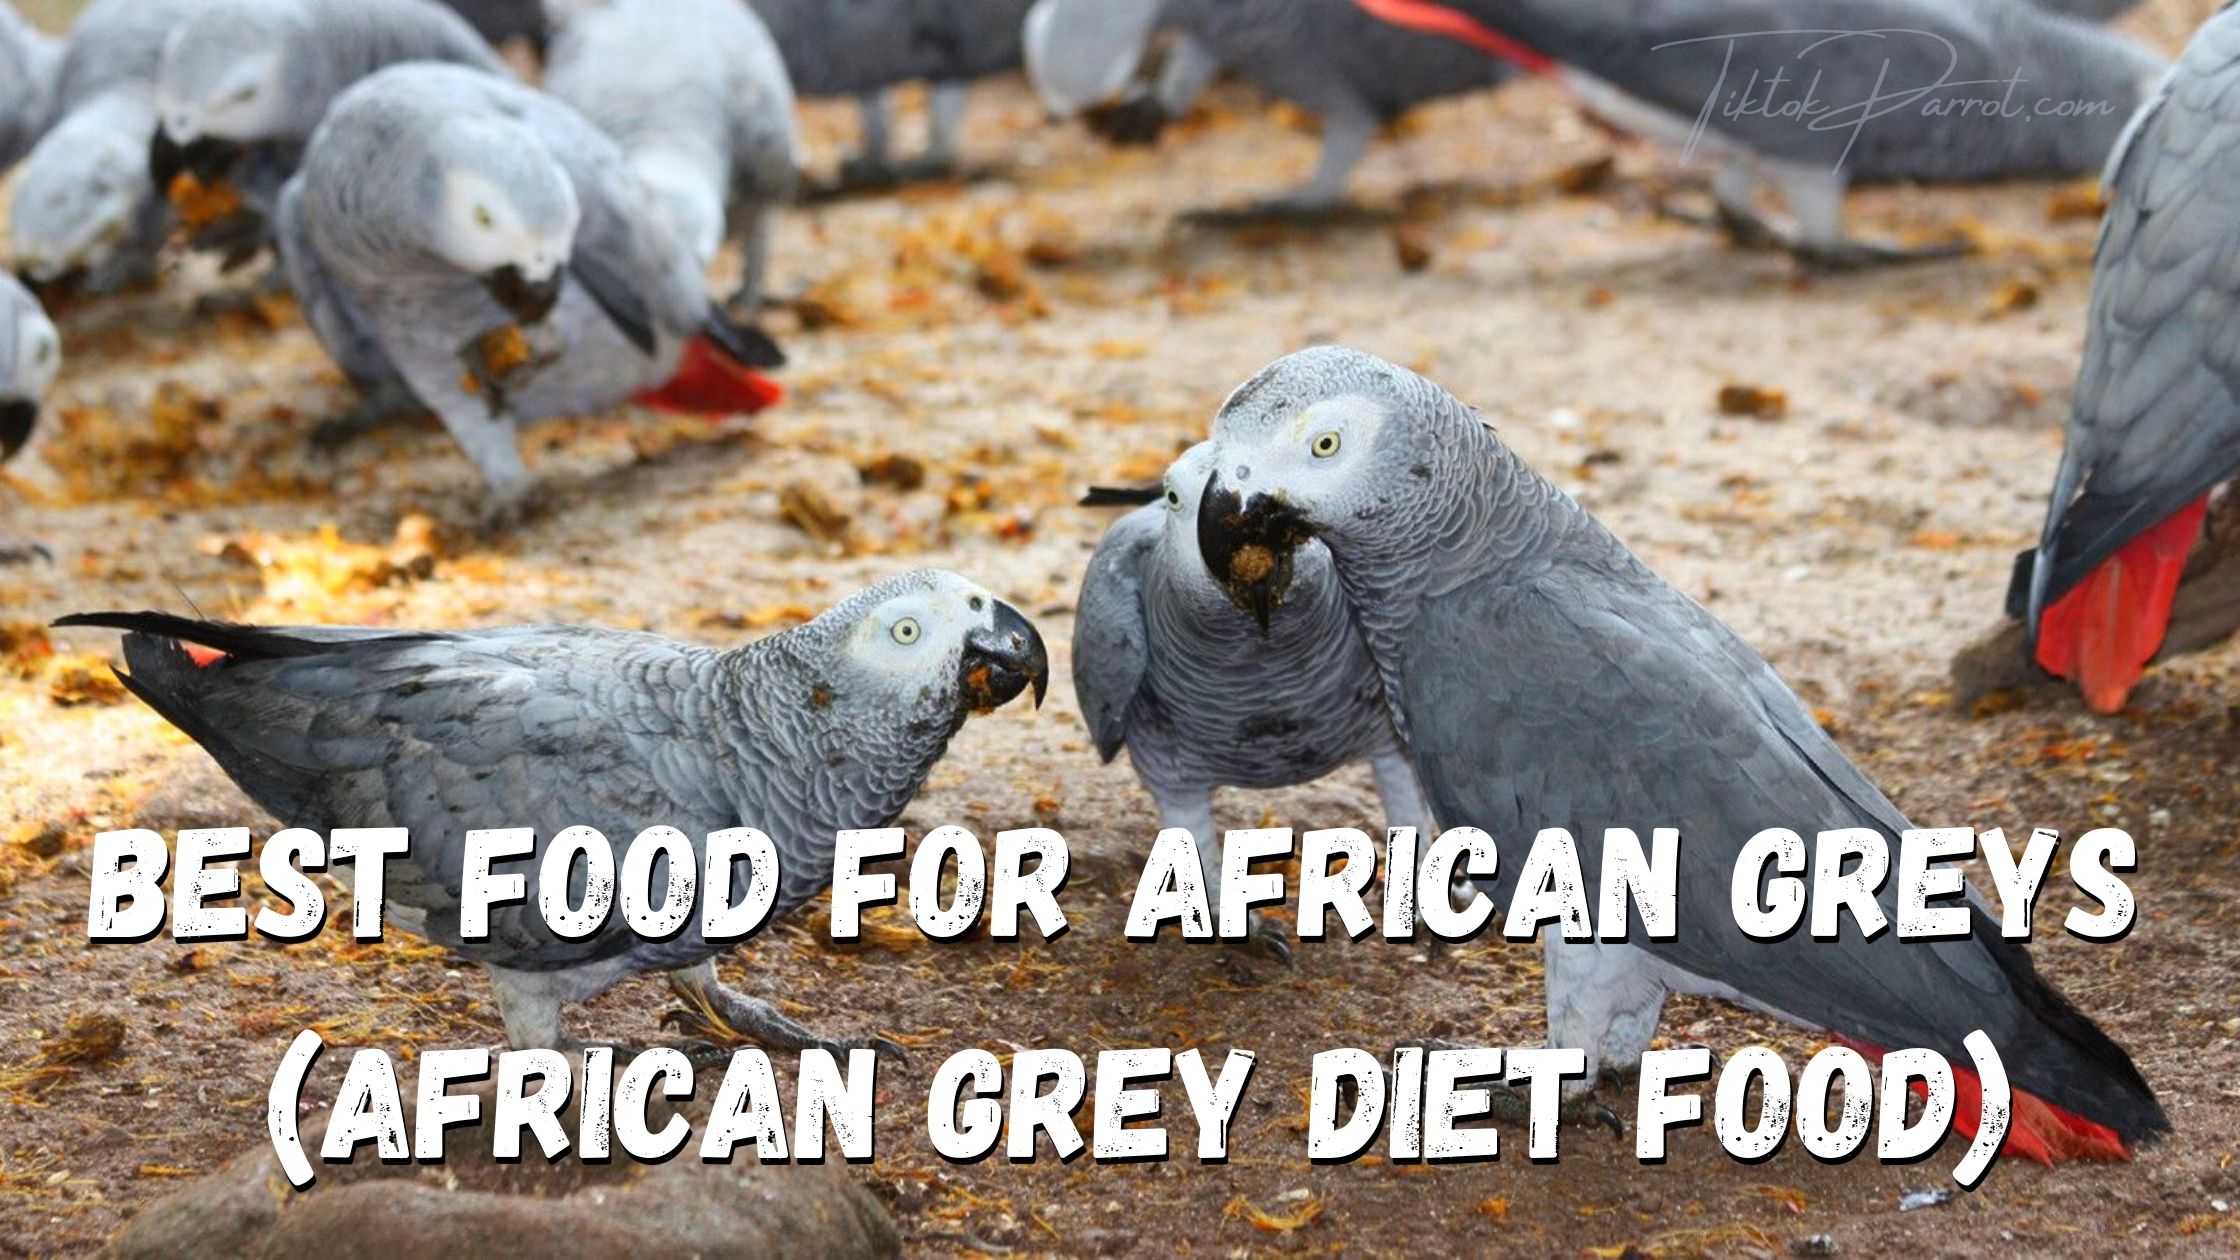 Best Food For African Greys and African Grey Diet Food